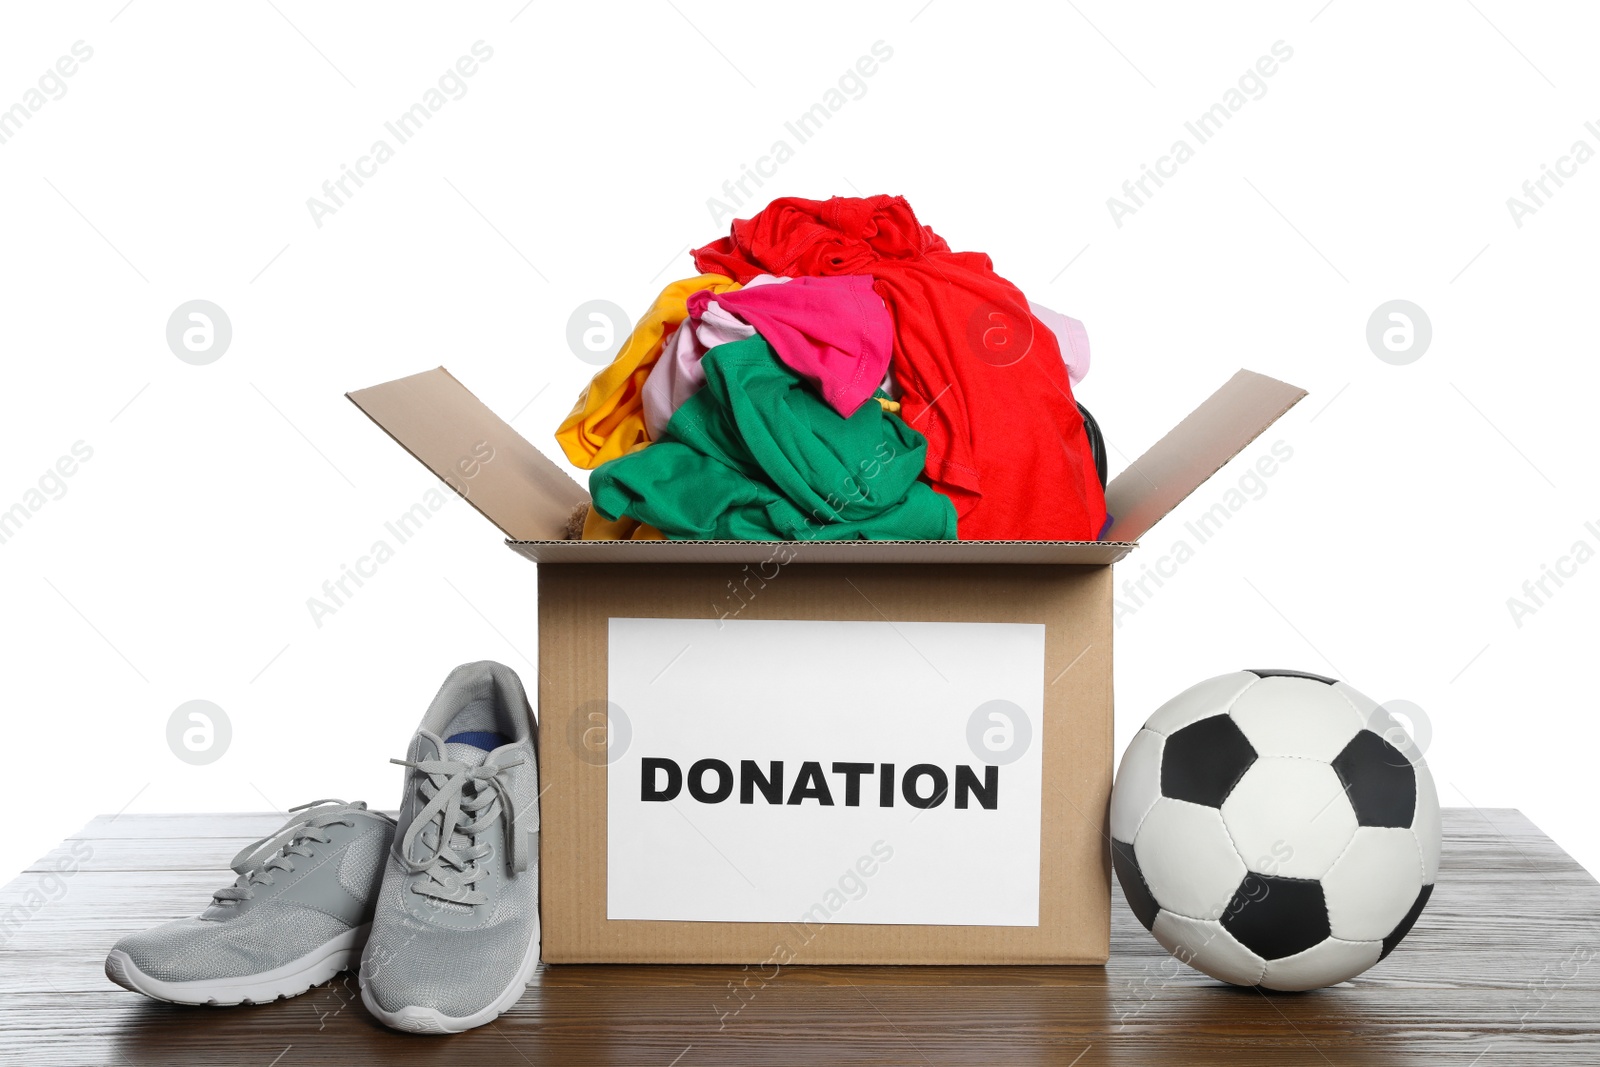 Photo of Donation box with clothes, shoes and soccer ball on table against white background